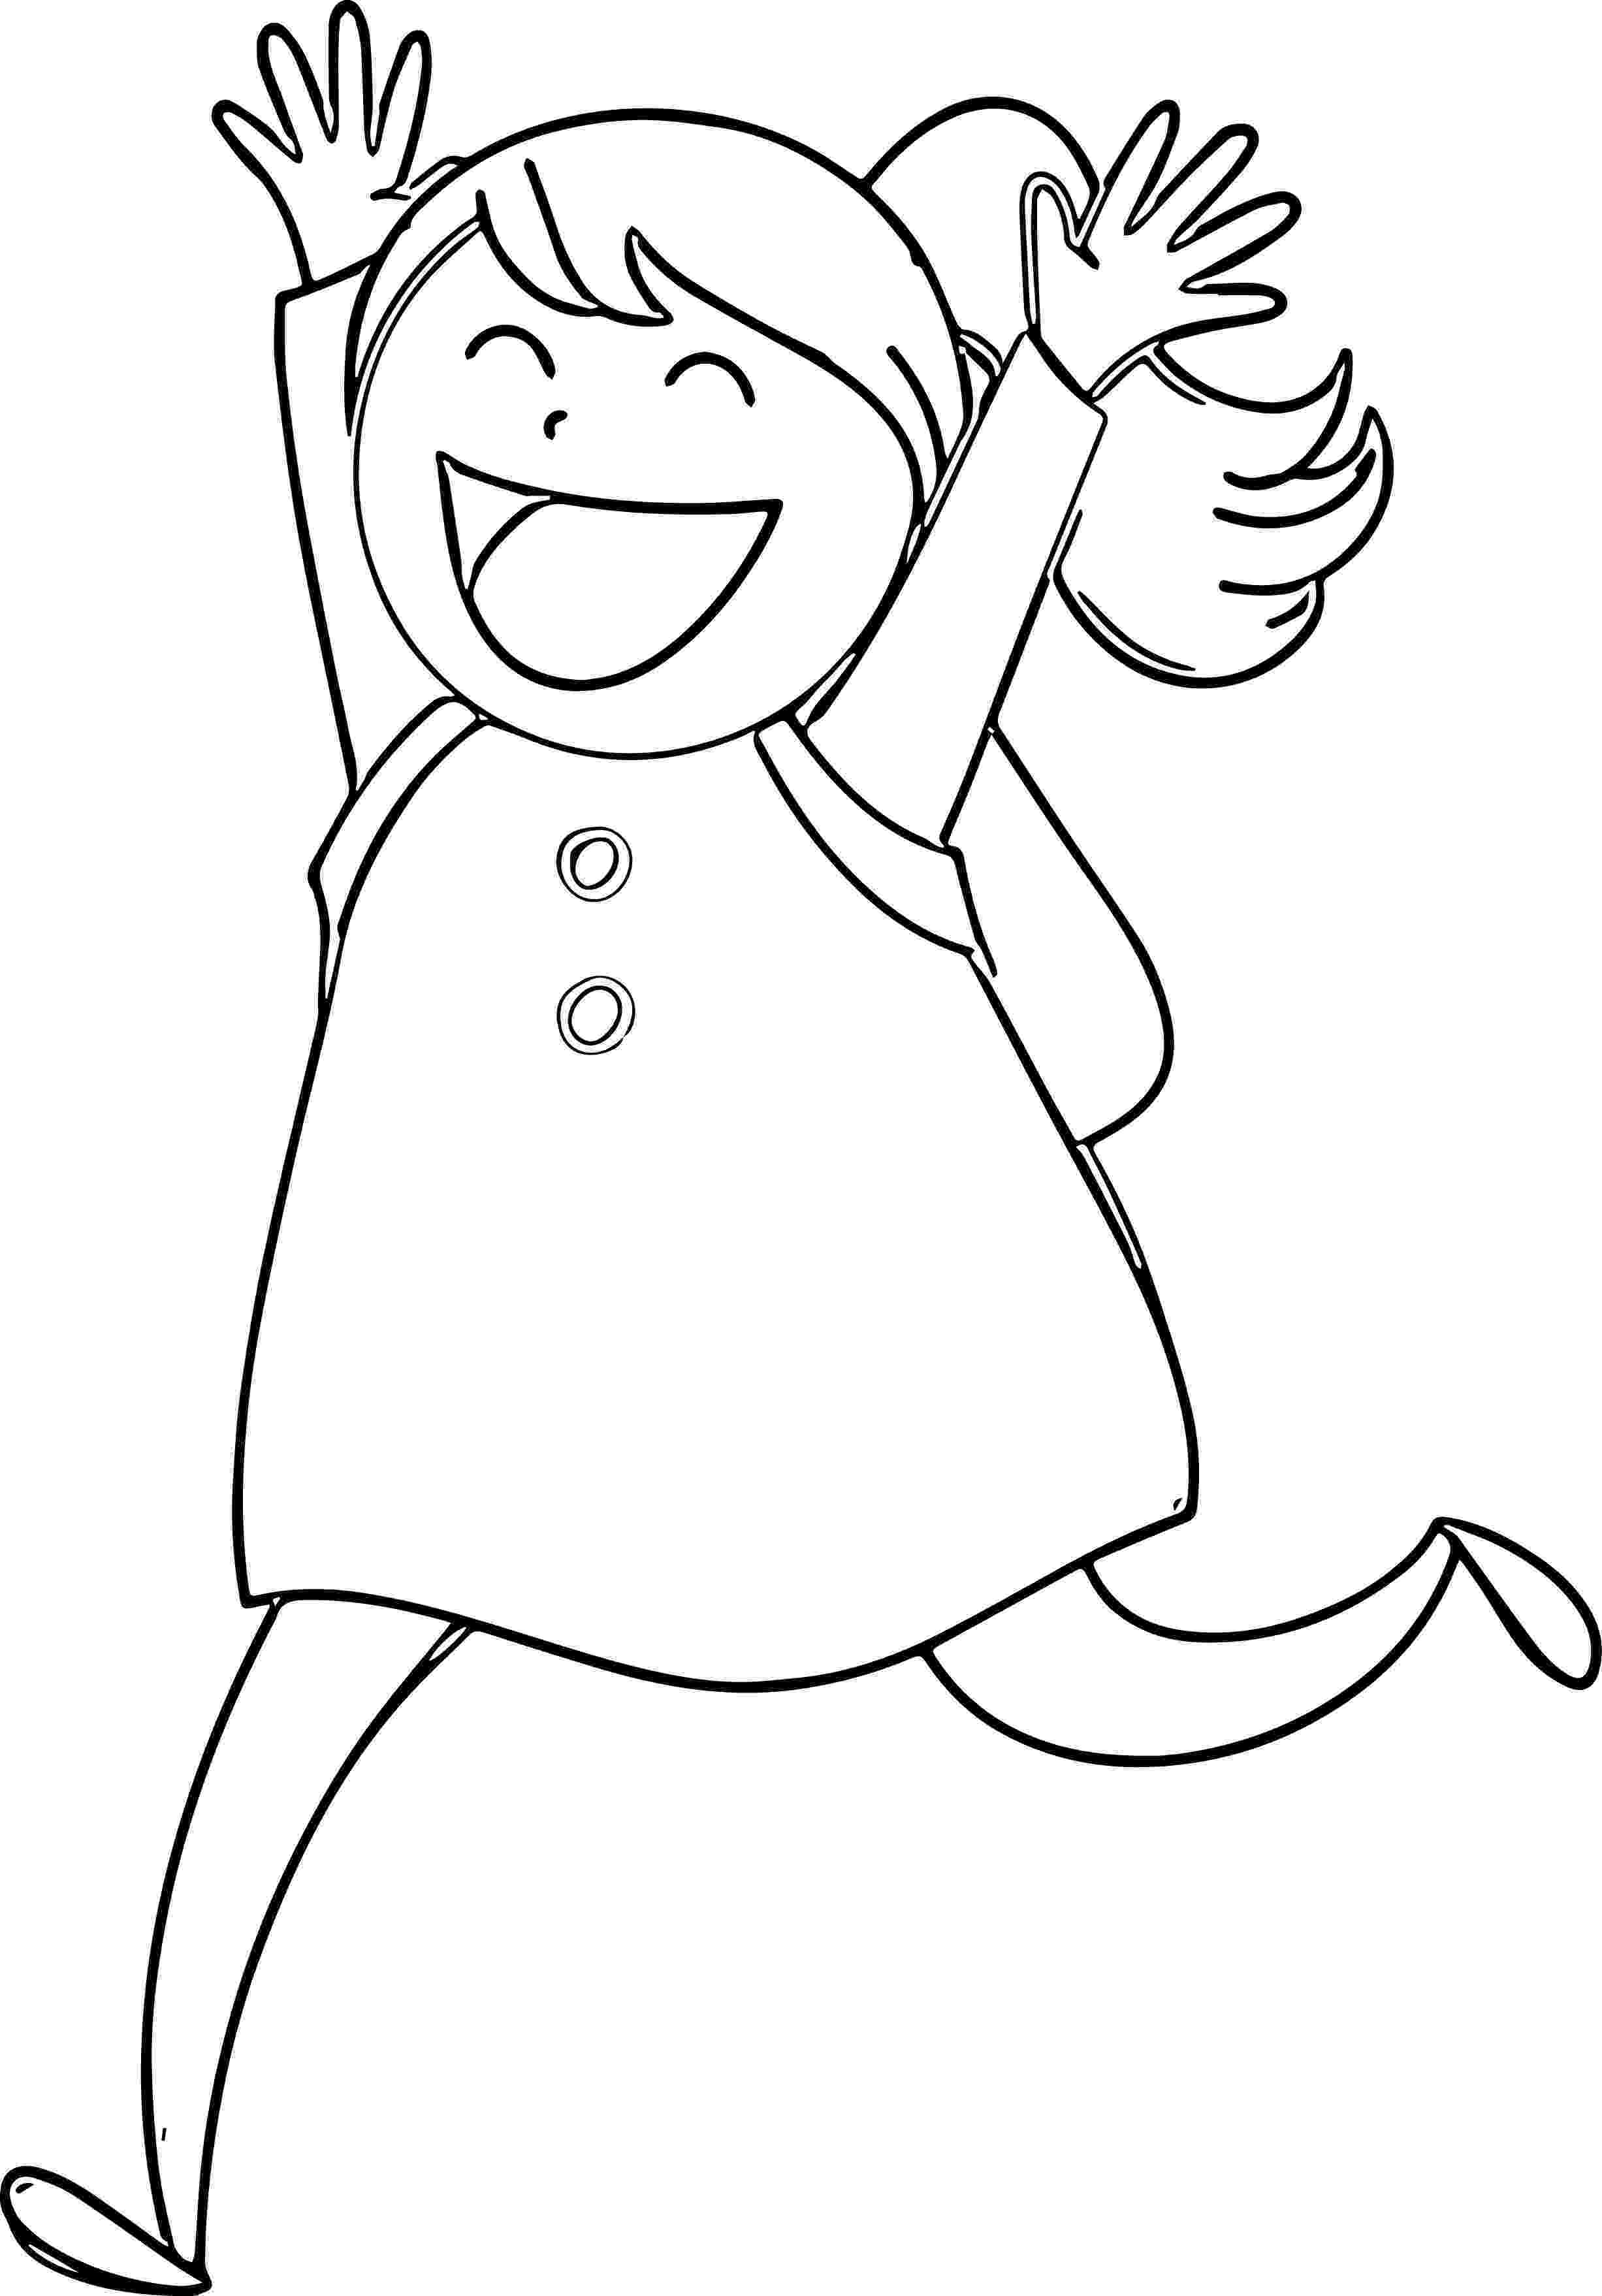 picture of a girl to color coloring pages of sad girl for kids to color in girl to picture of color a 